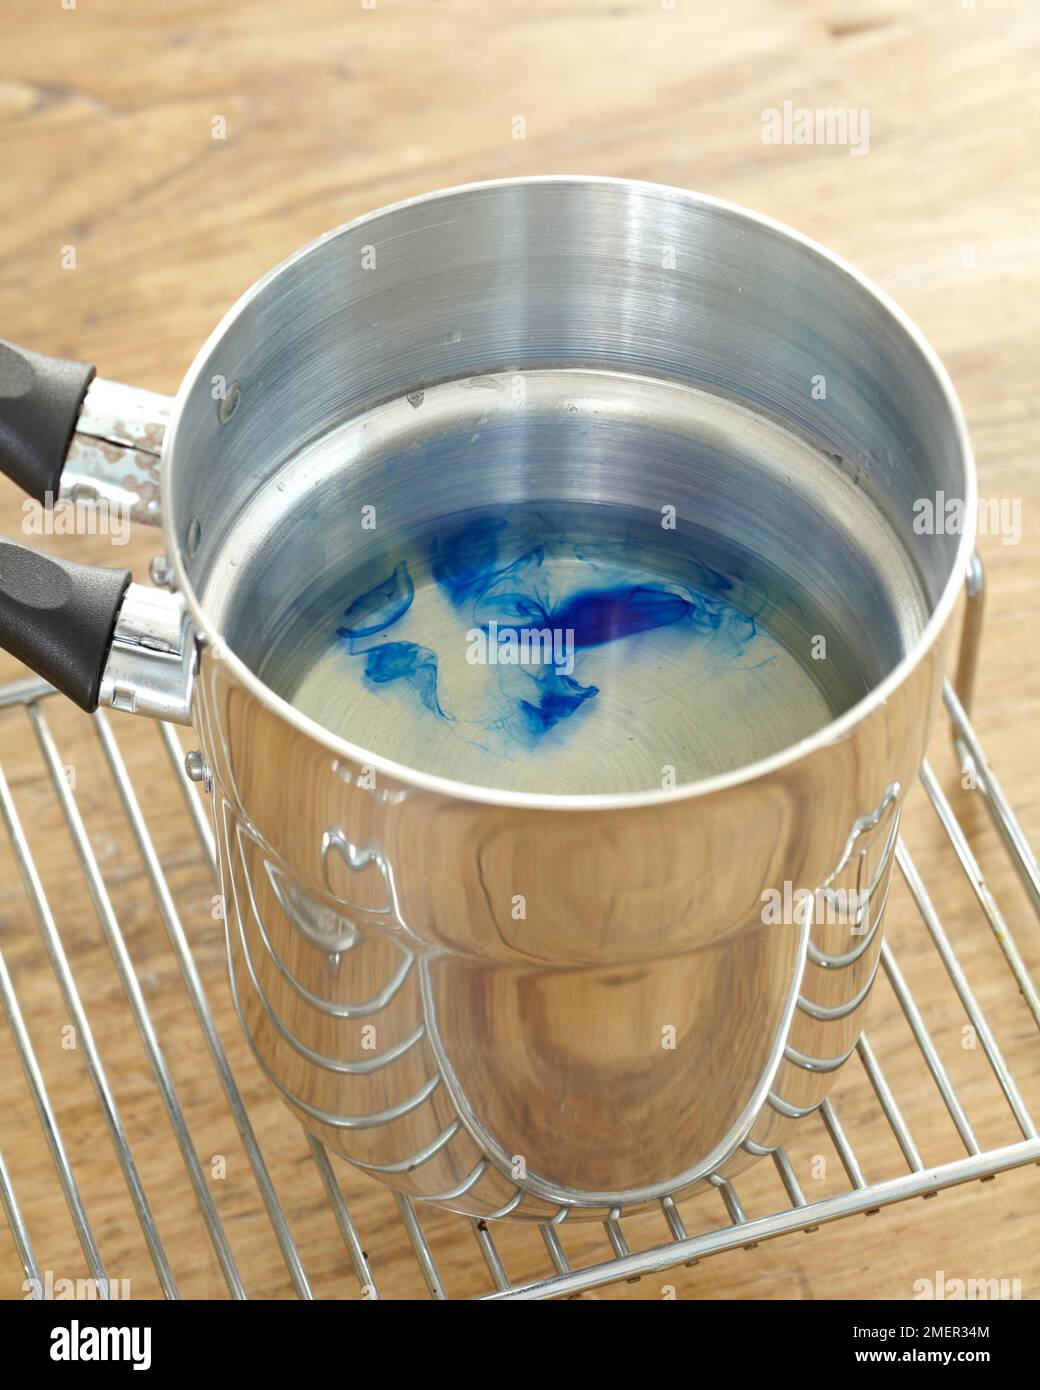 Blue dye dissolving in water at bottom of double-boiler (making candles) Stock Photo